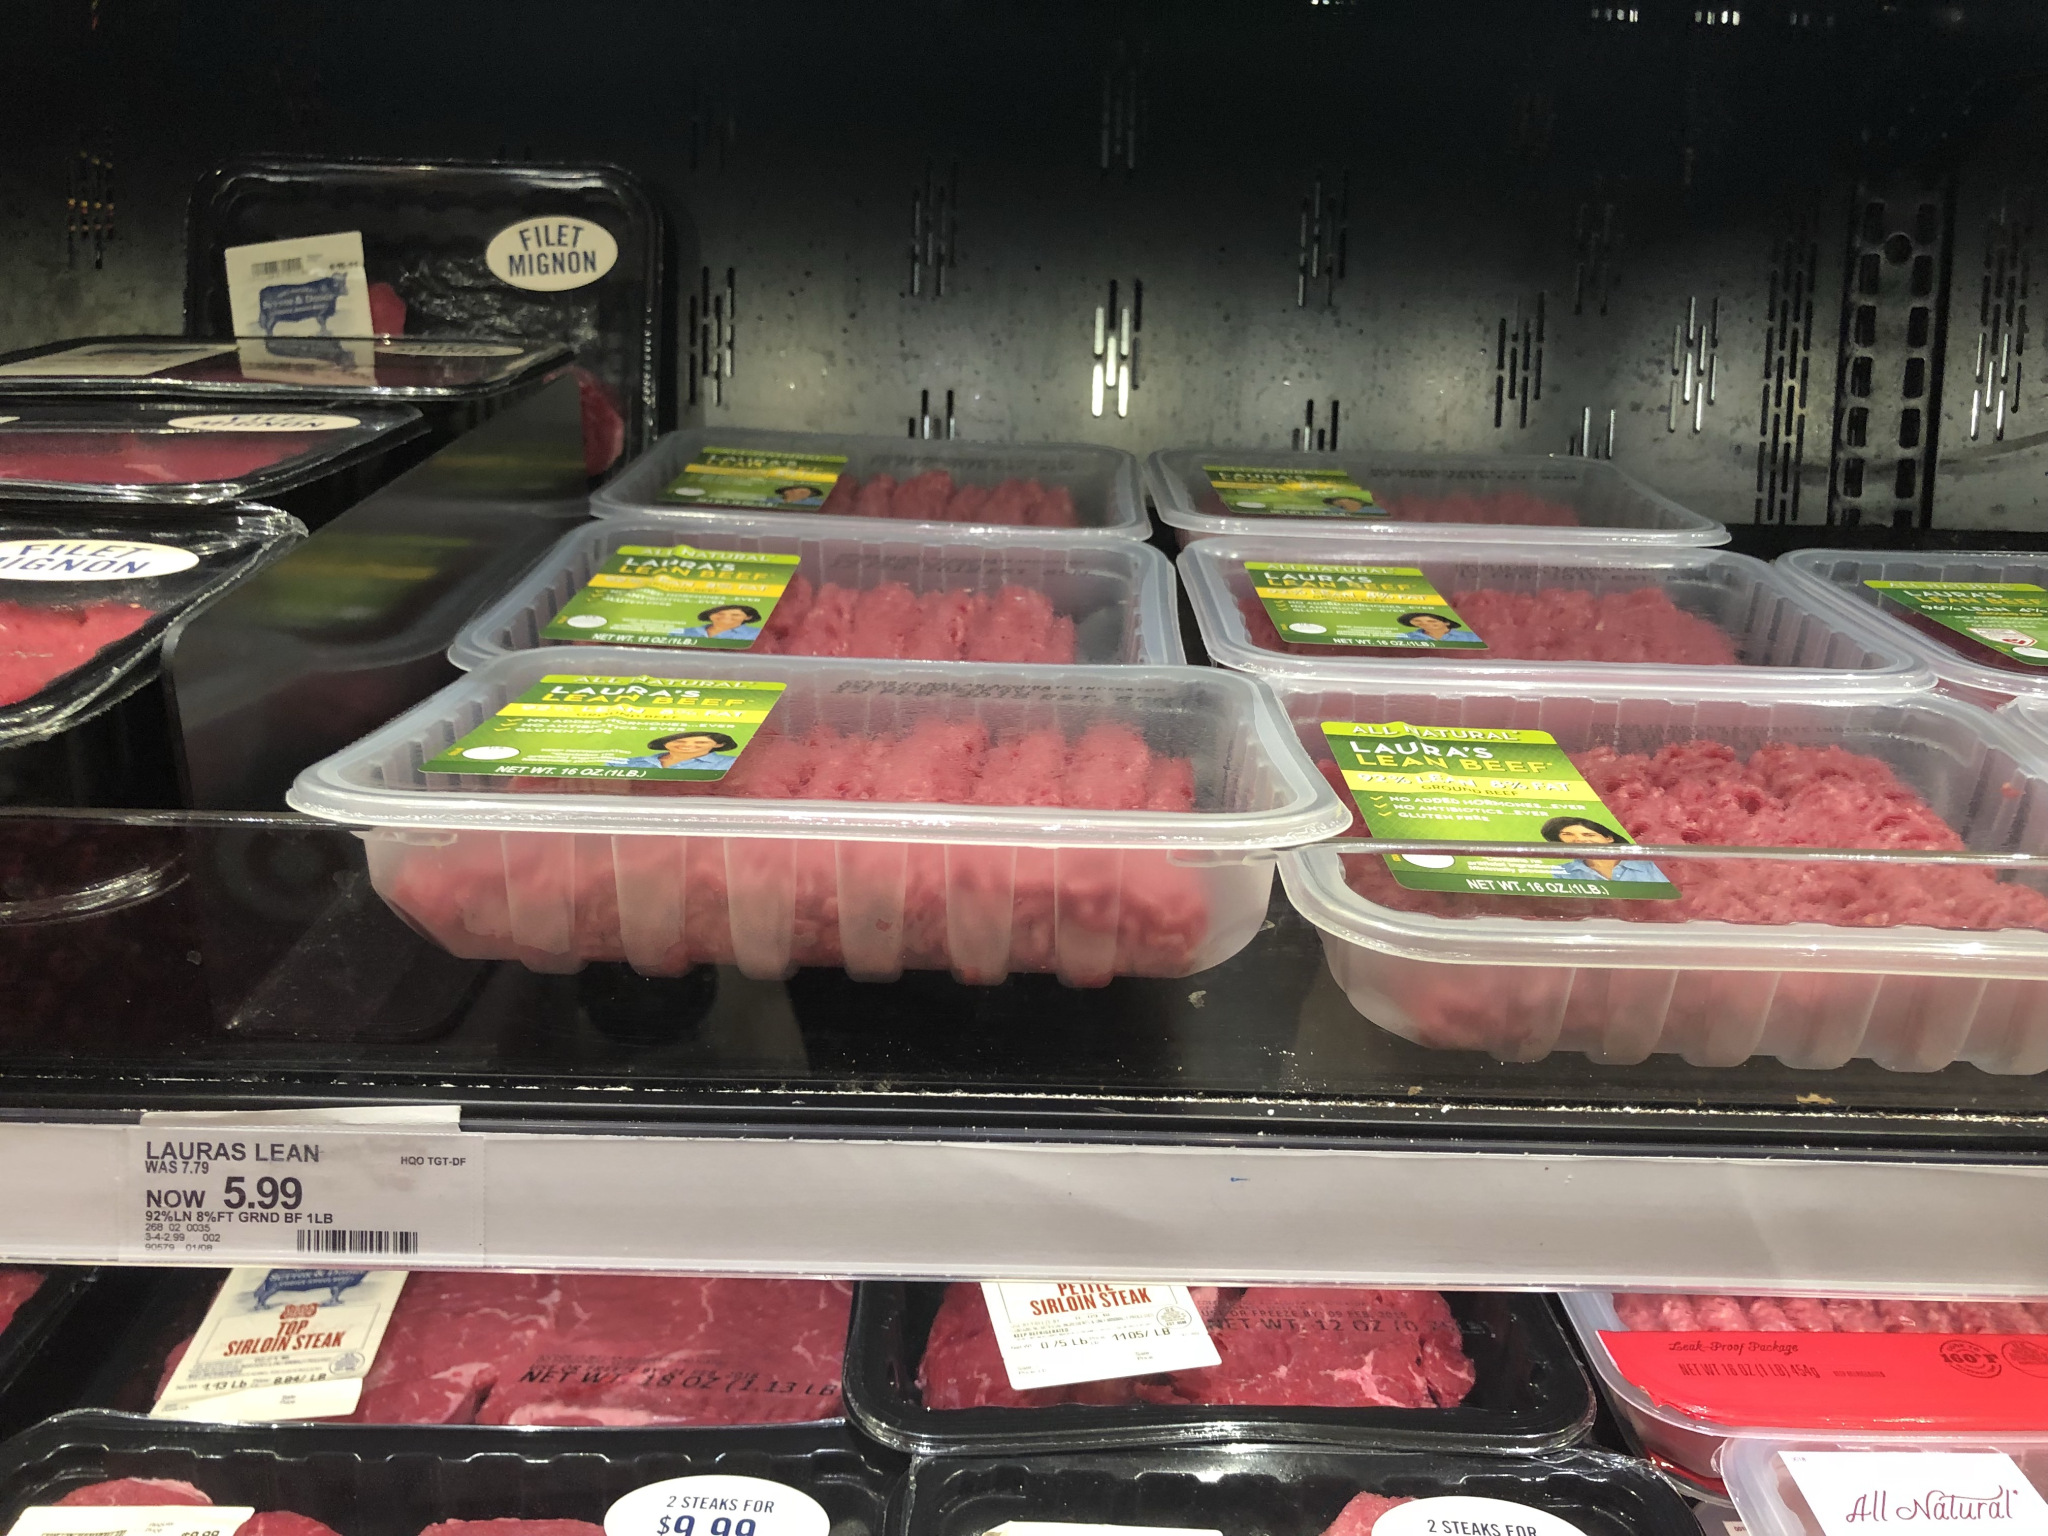 laura's lean ground beef deal - in the refrigerated case